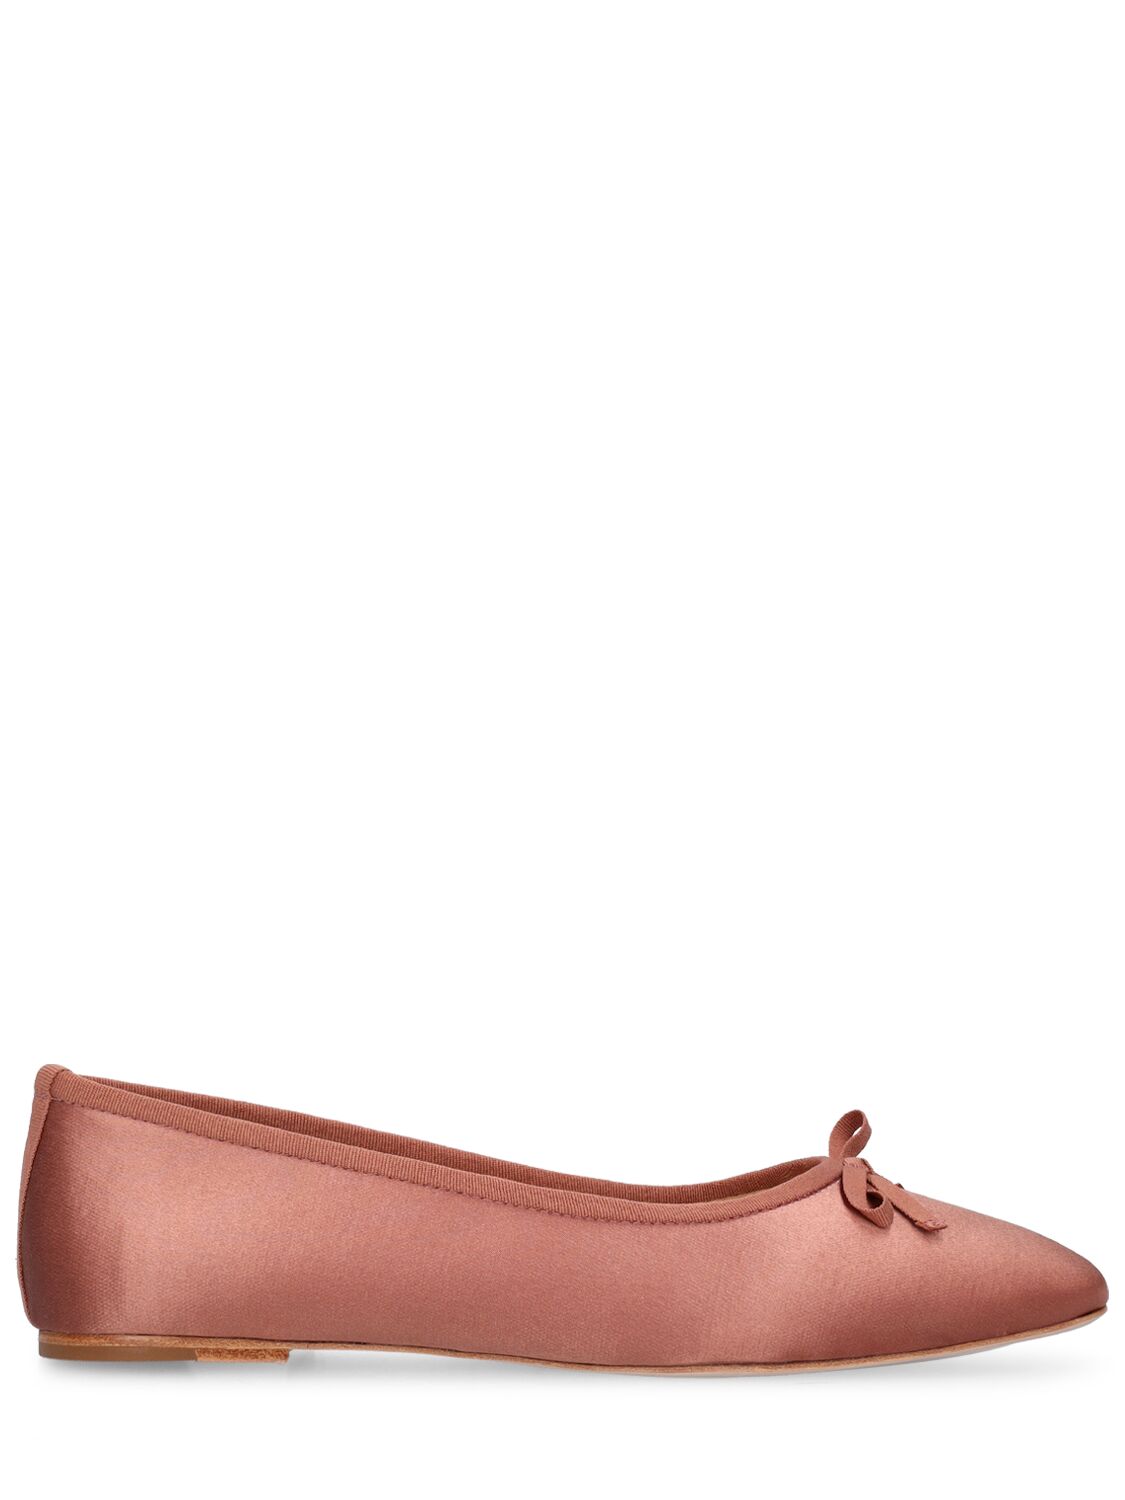 Reformation Paola Ballet Flat In Blush